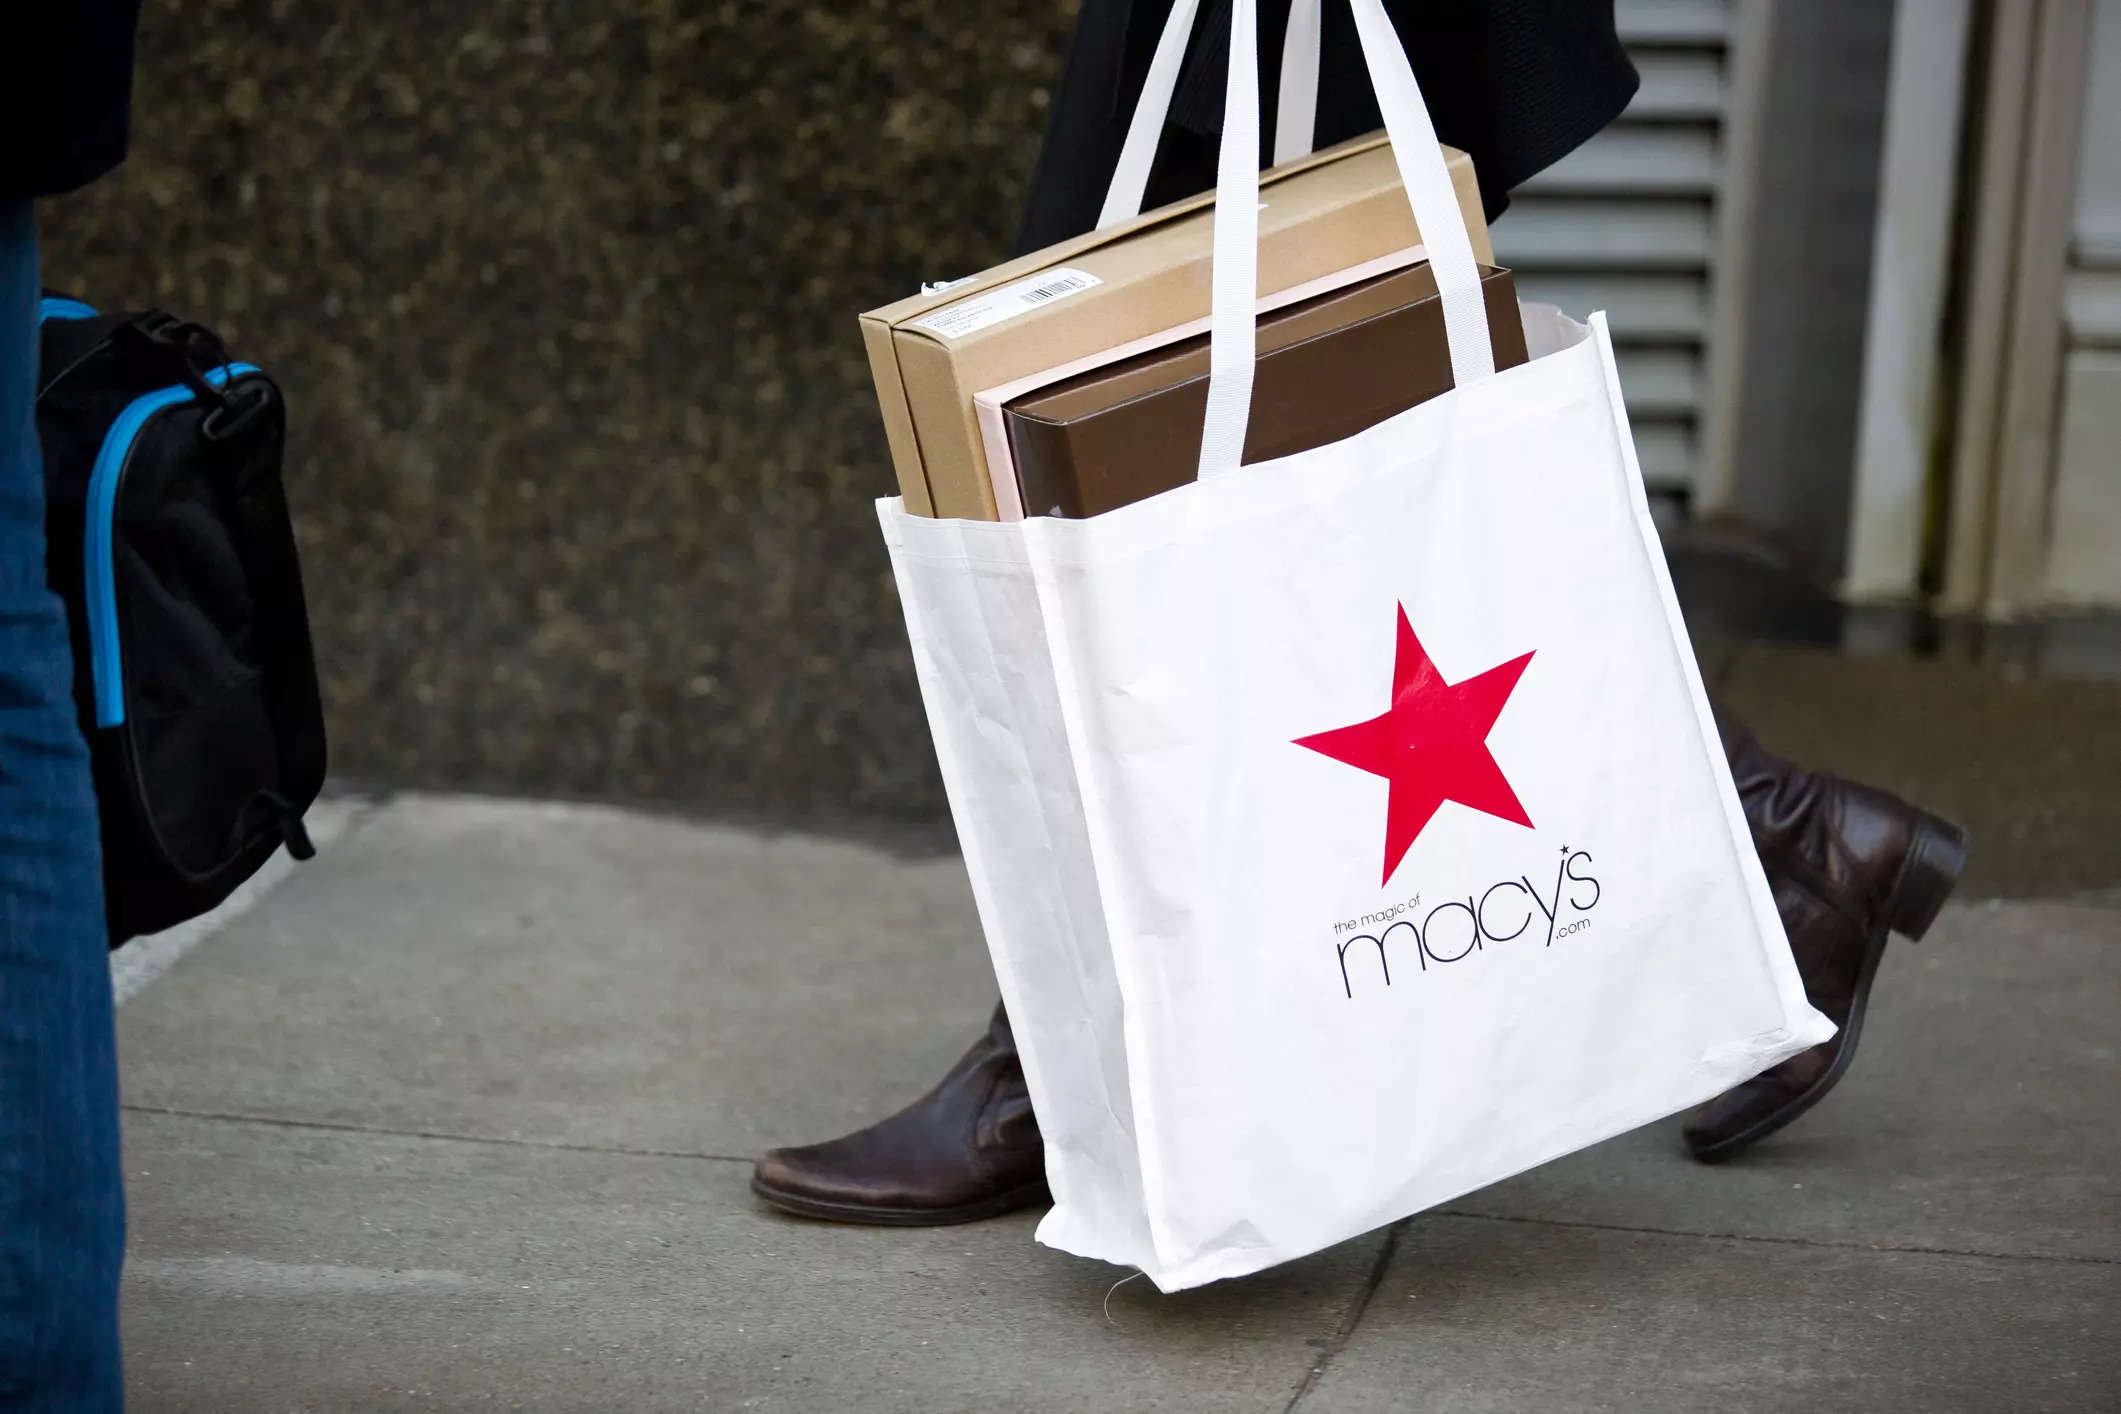 Macy's predicts another early start to holiday season shopping